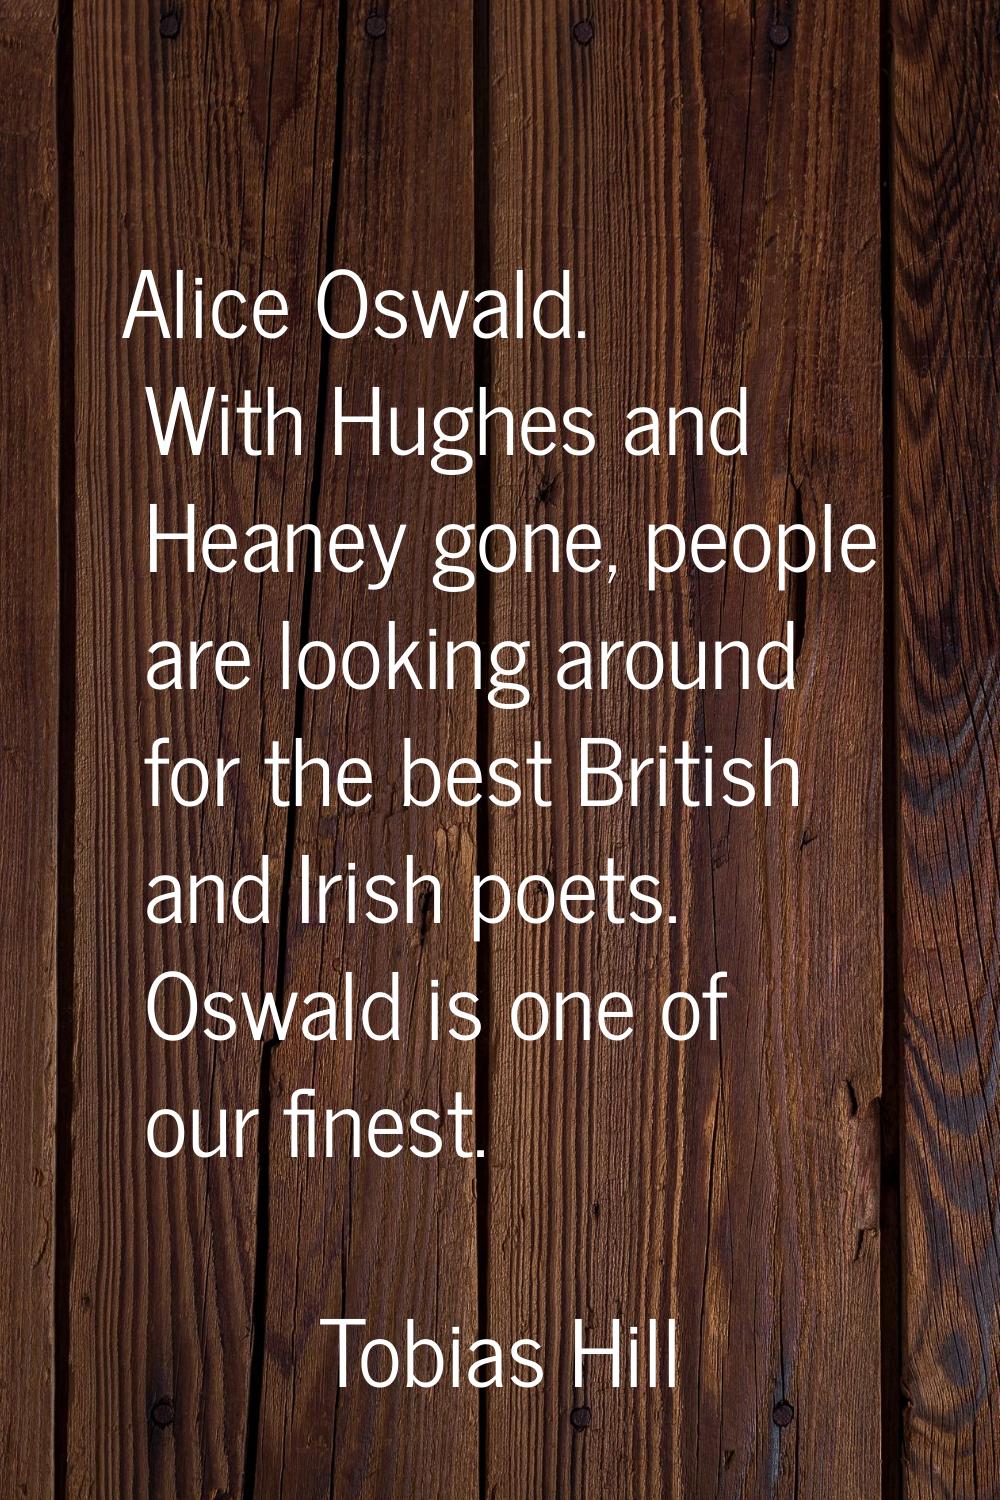 Alice Oswald. With Hughes and Heaney gone, people are looking around for the best British and Irish